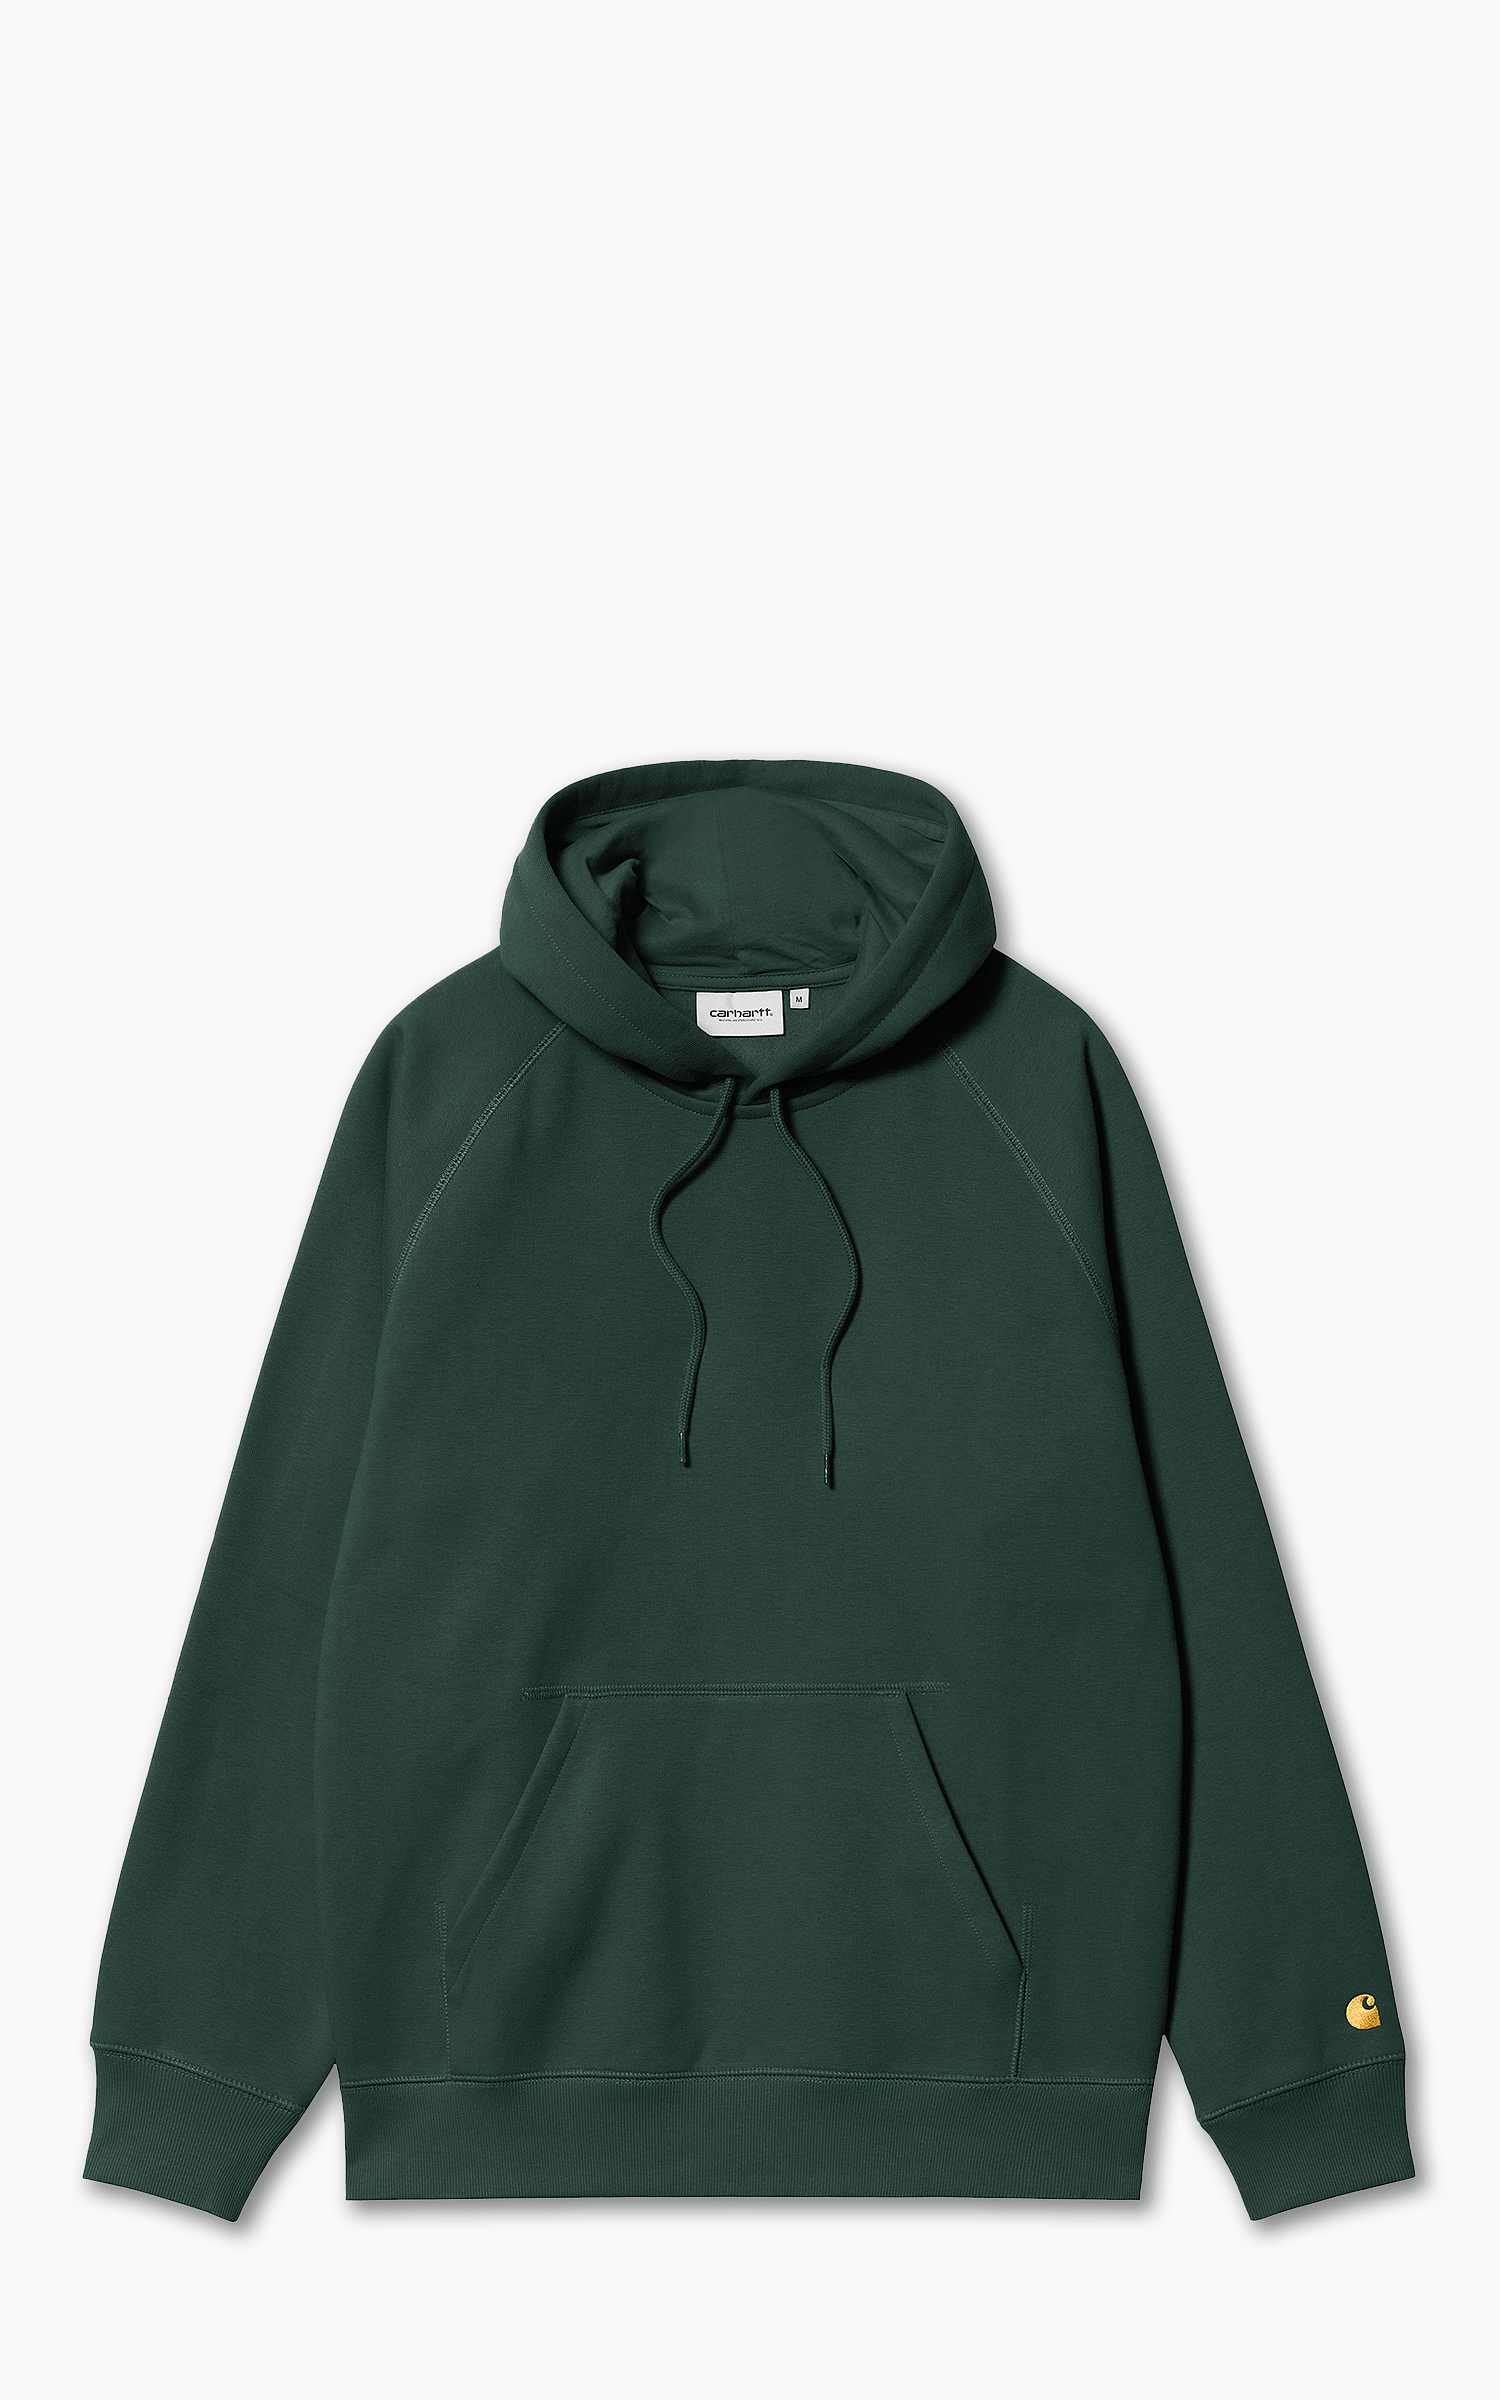 Carhartt WIP Hooded Chase Sweatshirt Discovery Green/Gold | Cultizm